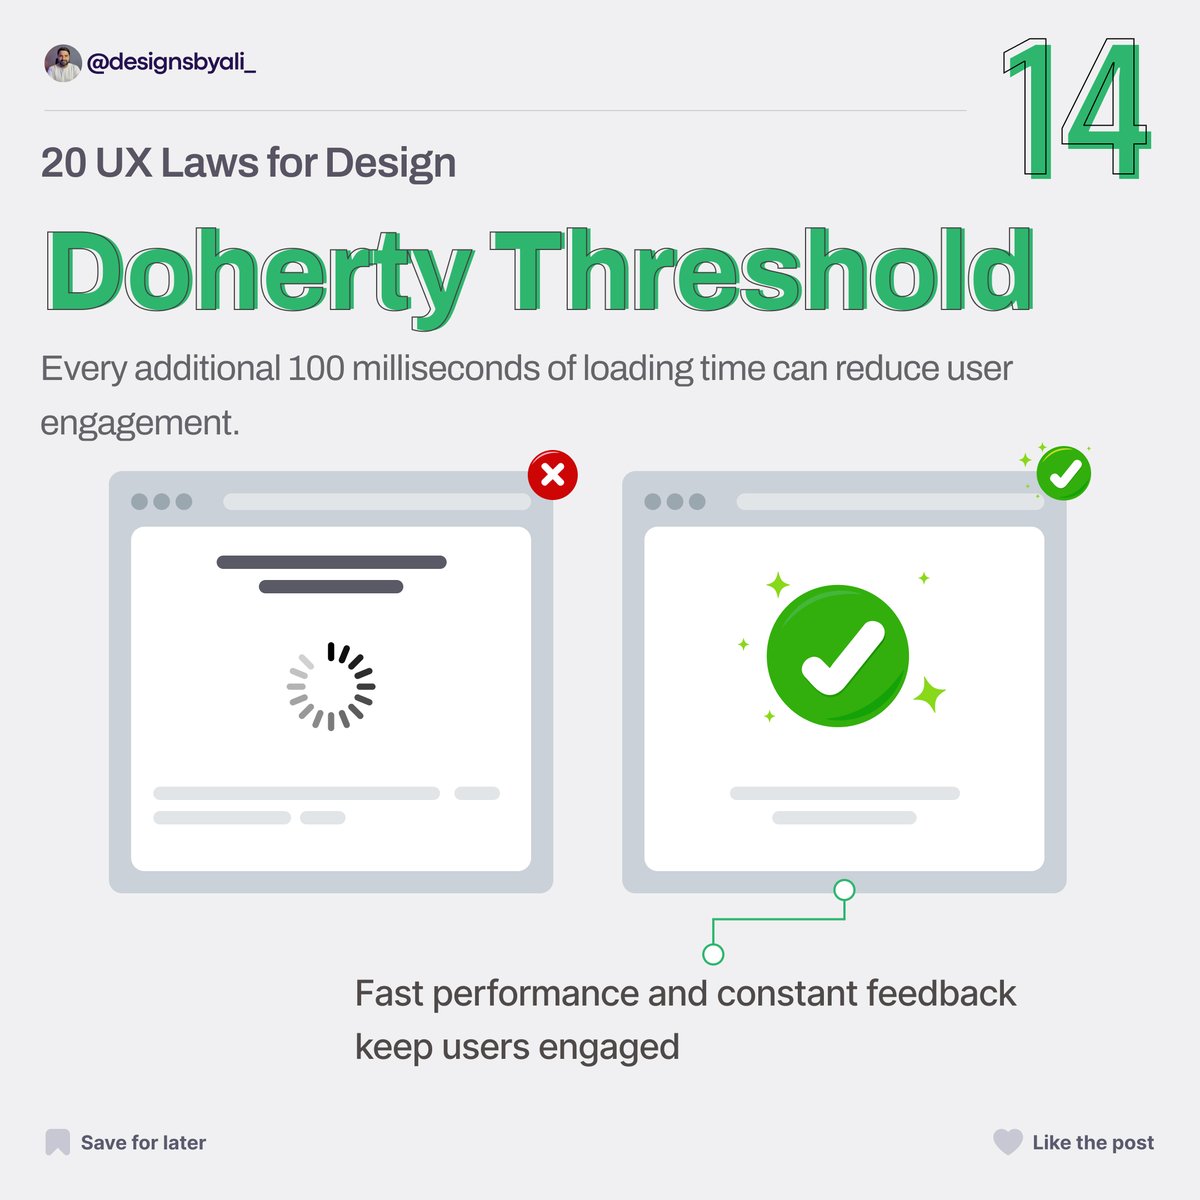 Top UX Laws: Doherty Threshold ⏳
Every additional 100 milliseconds of loading time can reduce user engagement. 💻

#DohertyThreshold #UserEngagement #LoadingTime #Performance #UserExperience #WebDesign #designsbyali #uidesigner #uiux #uxlaws